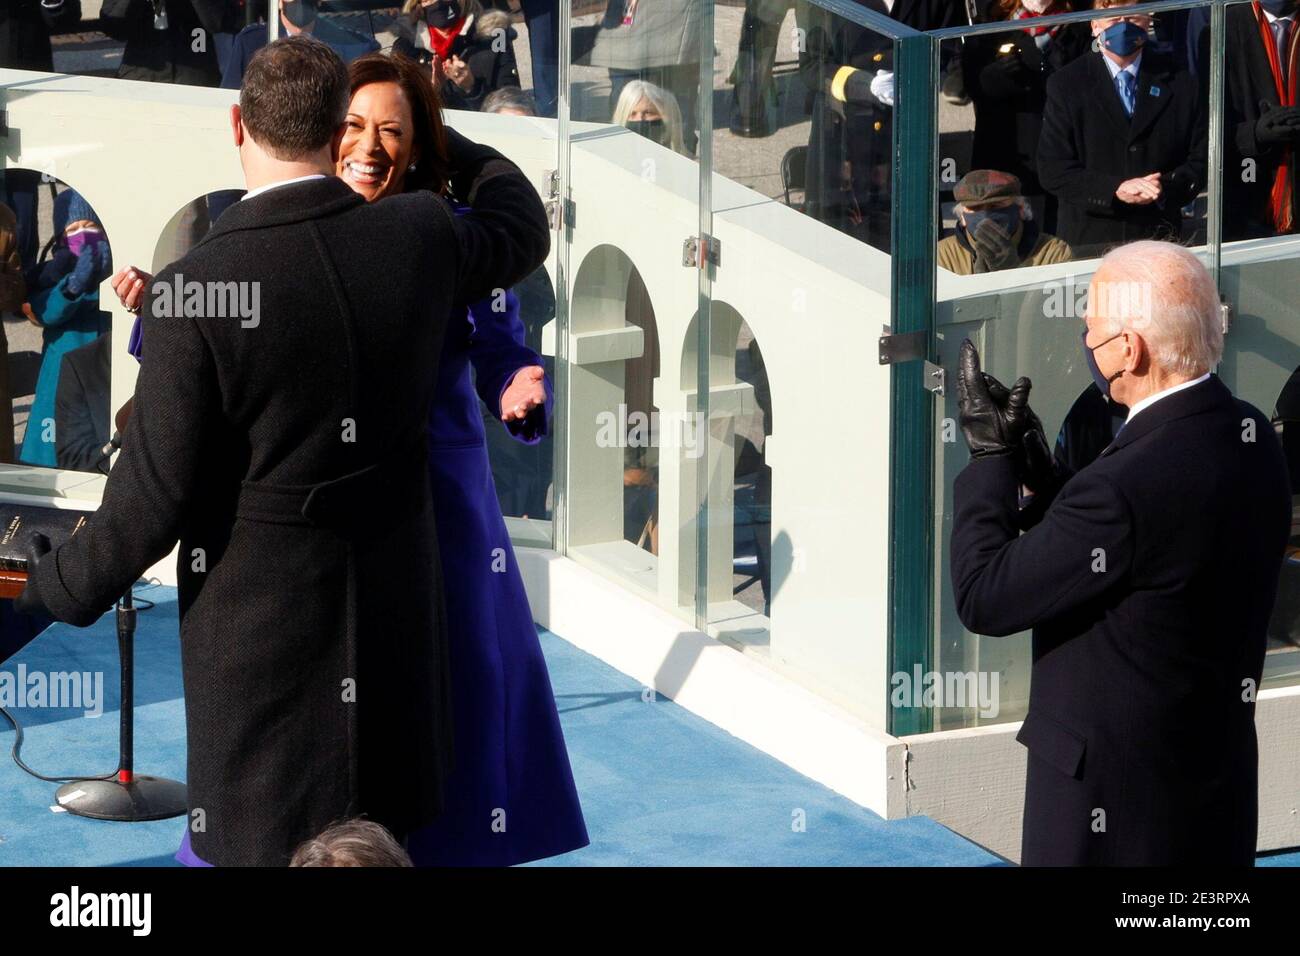 Kamala Harris is embraced by her husband Doug Emhoff as Joe Biden applauds, after her swearing-in during the inauguration of Joe Biden as the 46th President of the United States on the West Front of the U.S. Capitol in Washington, U.S., January 20, 2021. REUTERS/Jim Bourg Stock Photo